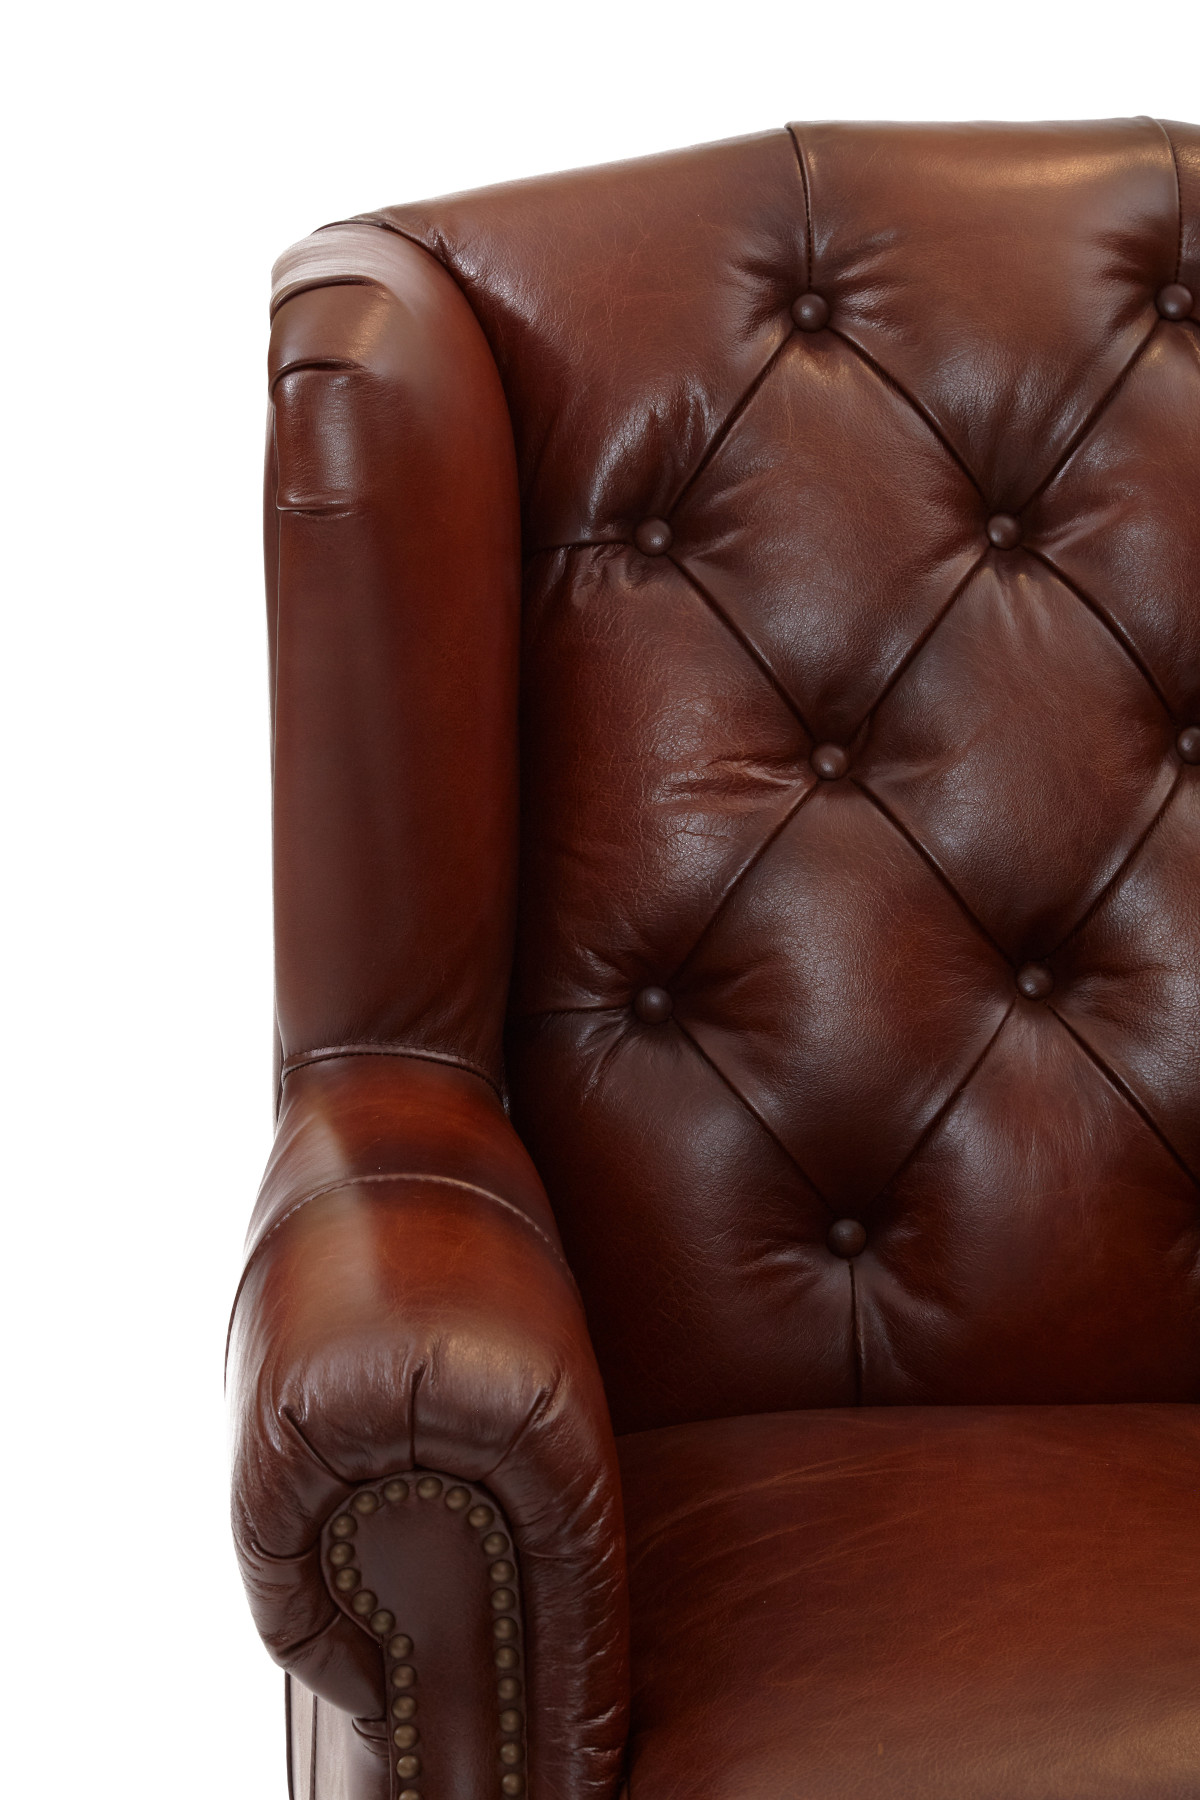 Leopold Wing Chair